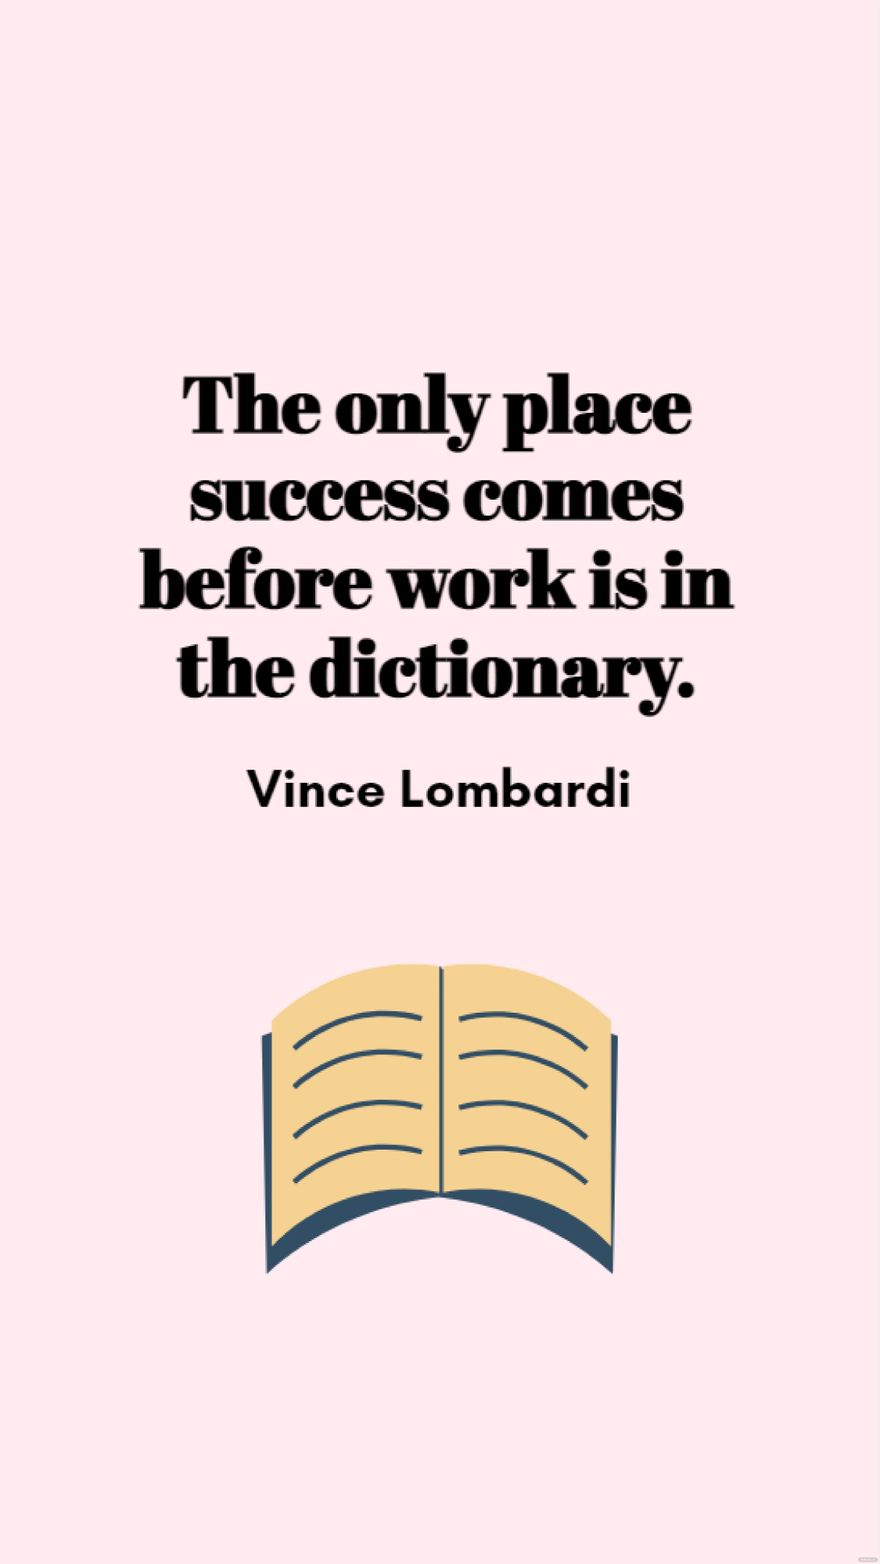 Free Vince Lombardi - The only place success comes before work is in the dictionary.